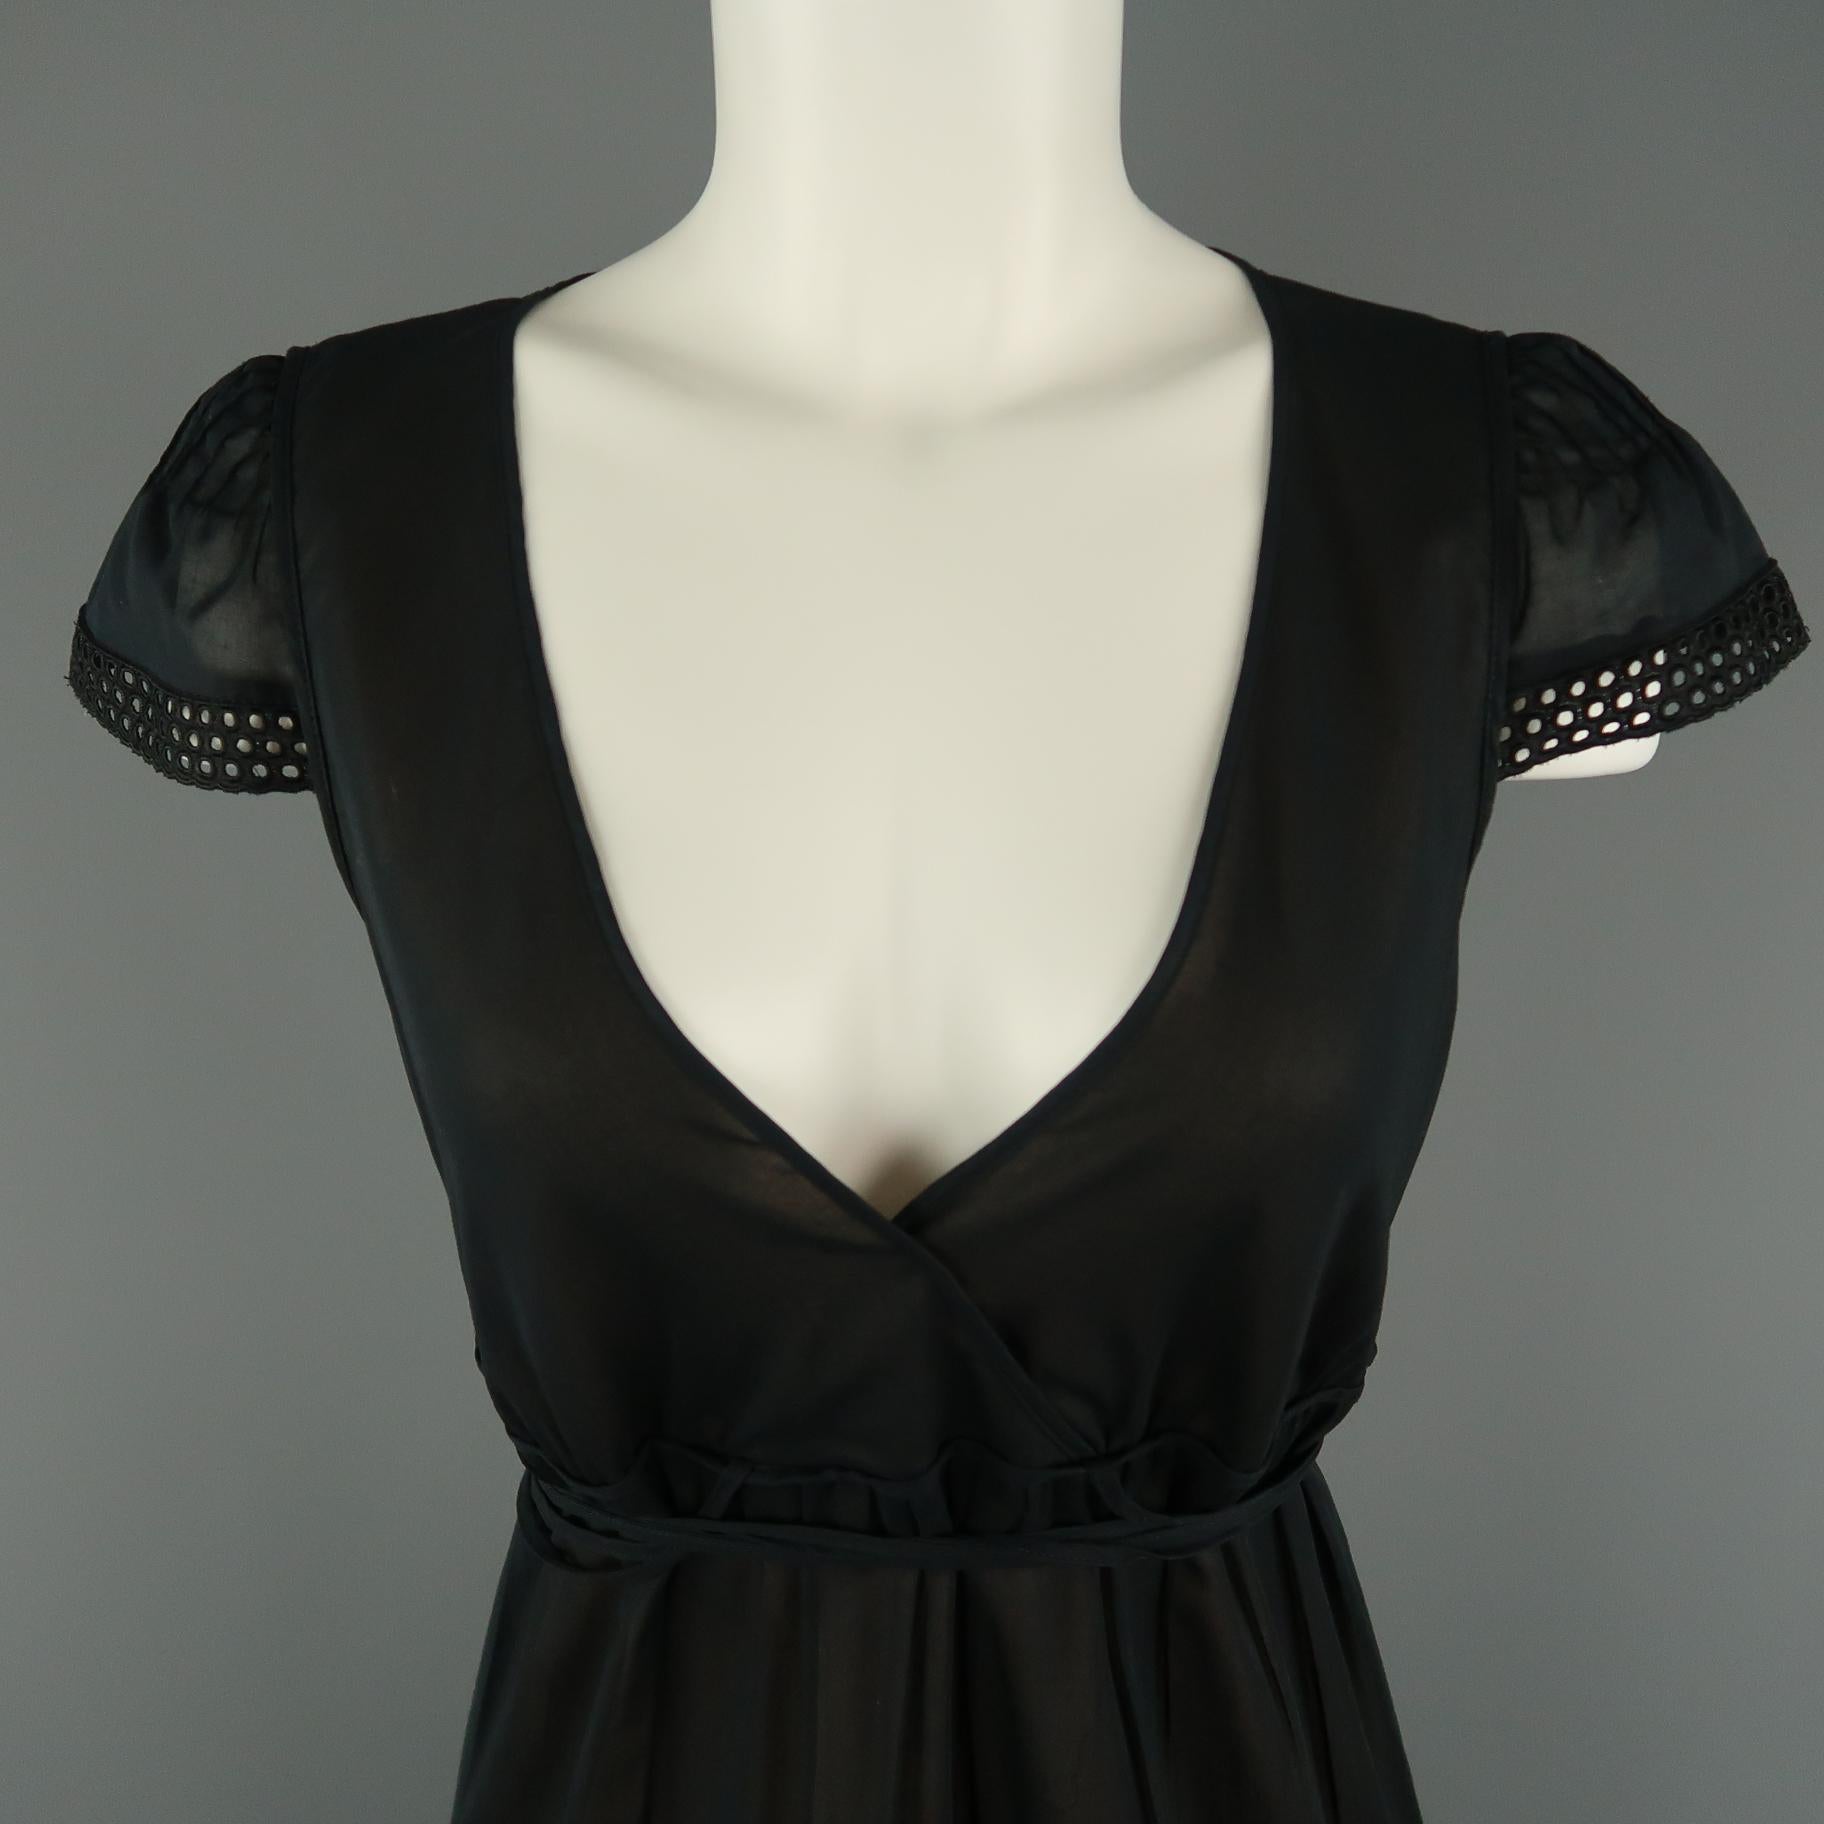 AKRIS peasant style dress comes in sheer black sheer cotton with a wrap V neck, short eyelet lace trimmed sleeves, and tiered A line skirt with wrap tie belt. Made in Switzerland.
 
Very Good Pre-Owned Condition.
Marked: 8
 
Measurements:
